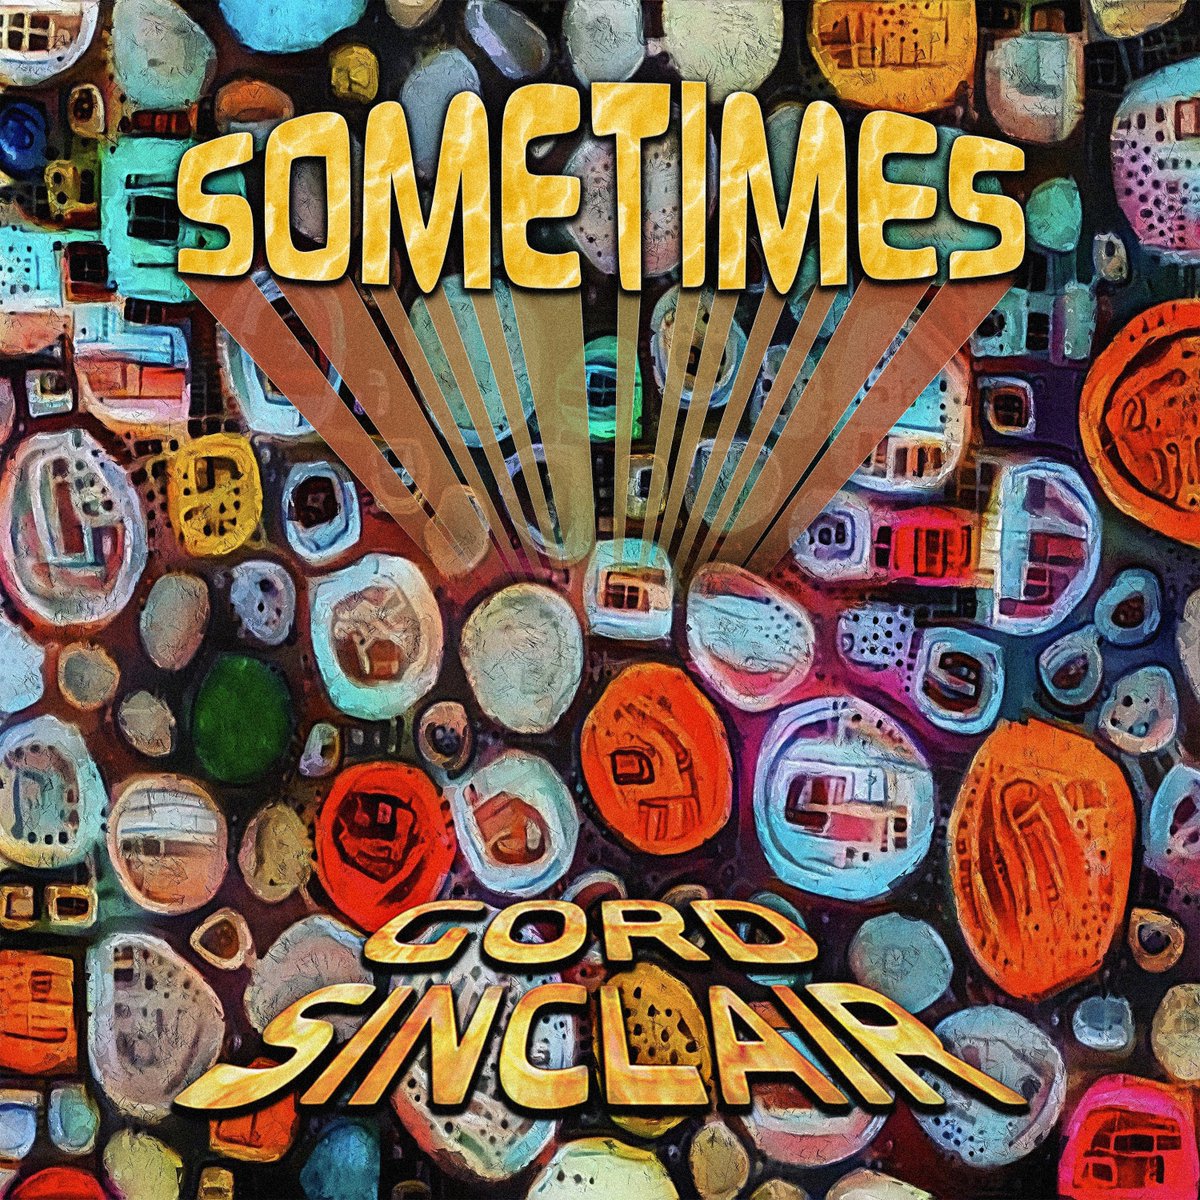 My new single “Sometimes” is out now! My new album “In Continental Drift” will be released April 14th. Listen to “Sometimes” now at: gordsinclair.lnk.to/sometimesPR